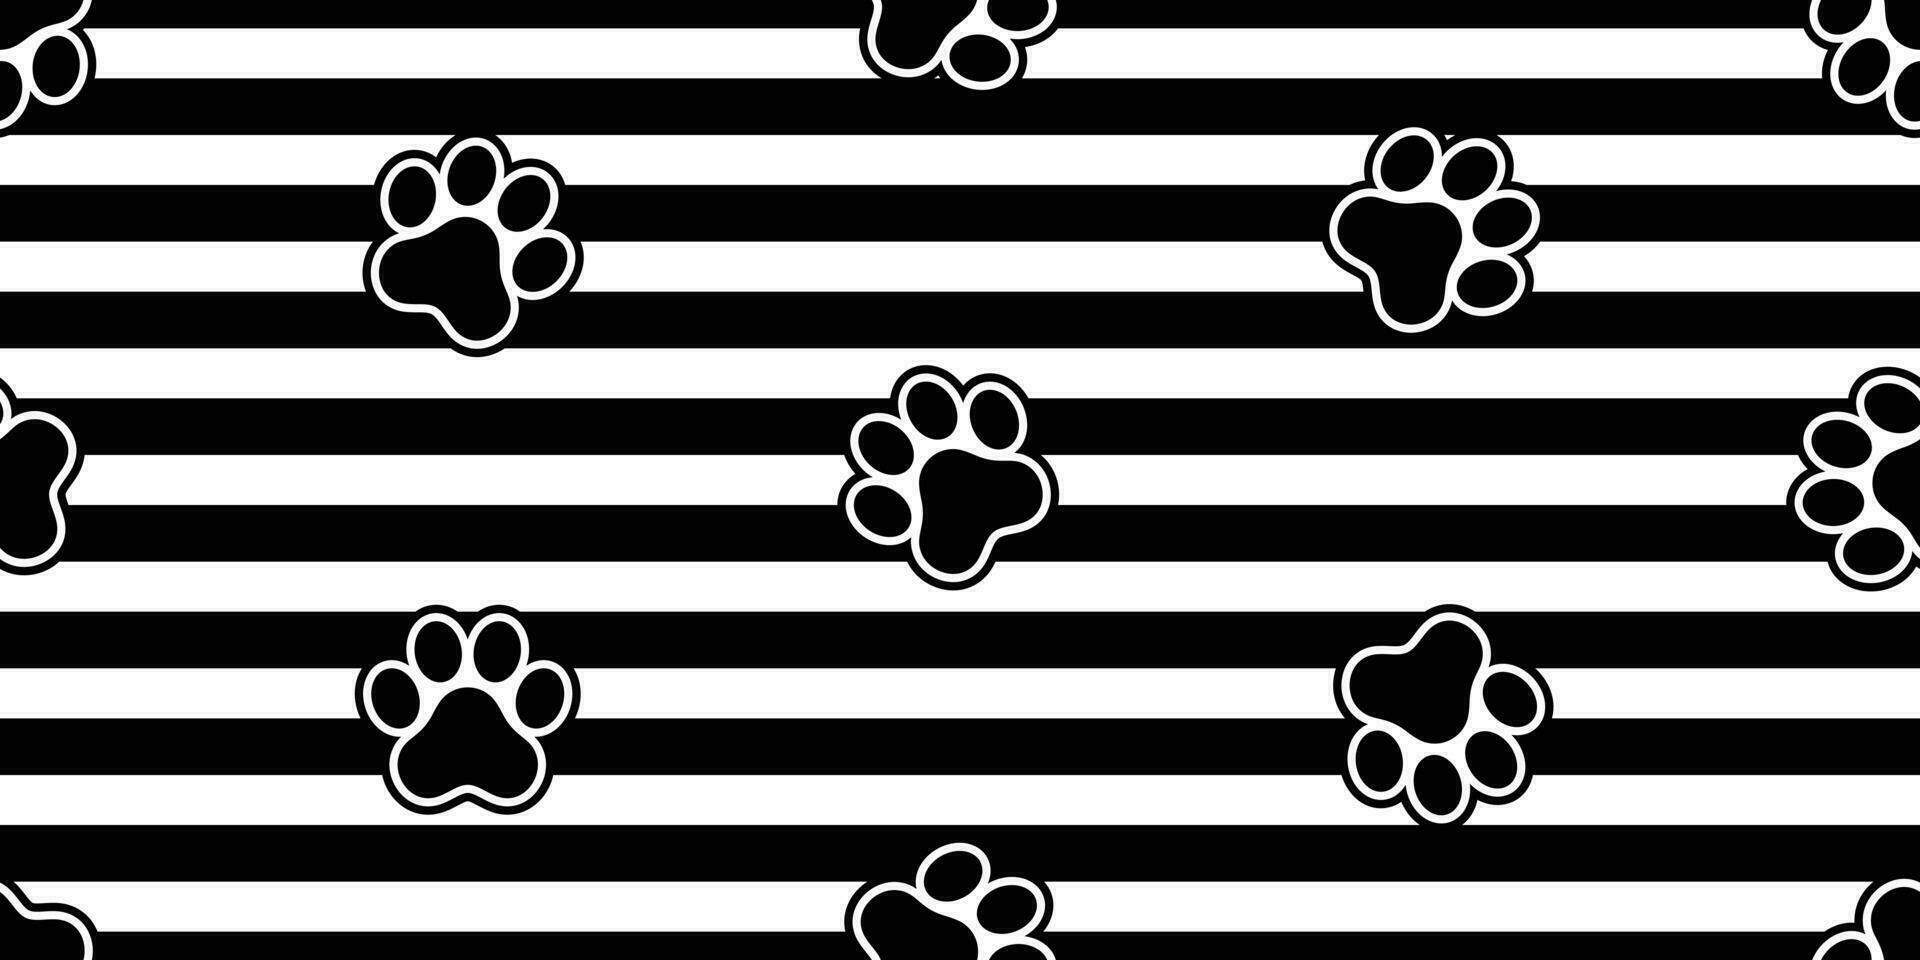 dog paw seamless pattern vector footprint stripes french bulldog cartoon scarf isolated repeat wallpaper tile background illustration doodle design